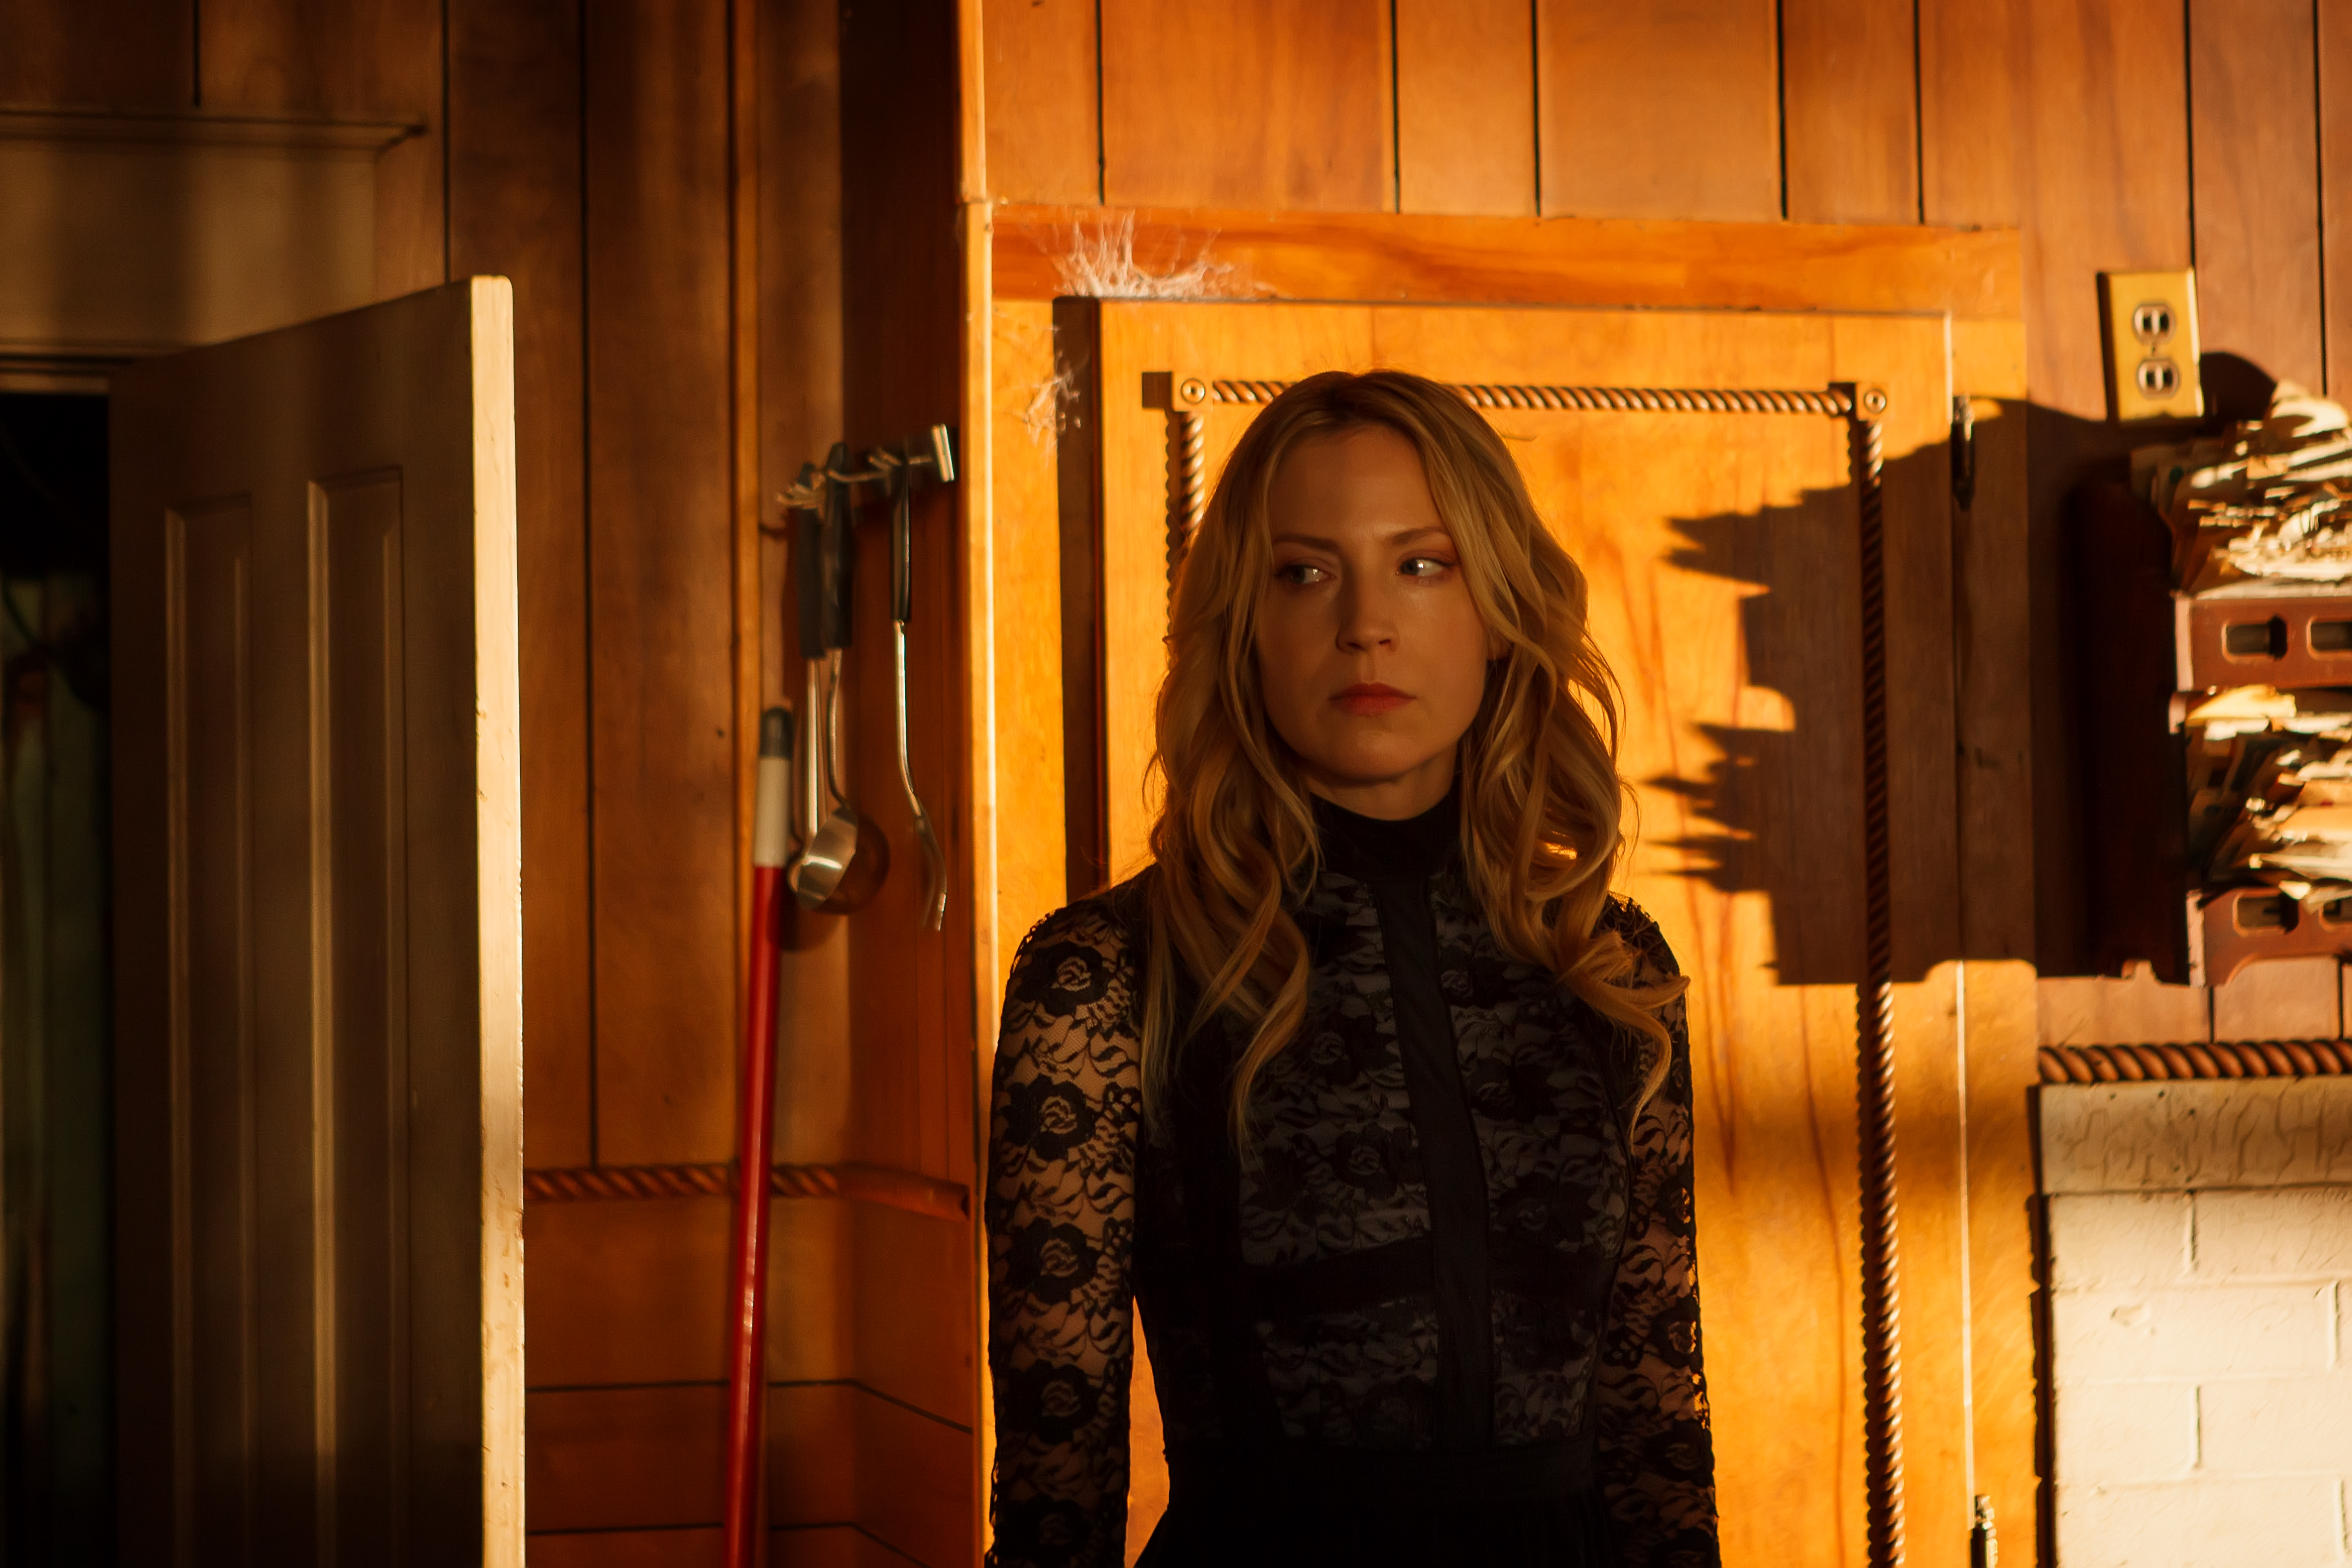 Martin Starr on Intruders, playing evil and making shows we love - SciFiNow